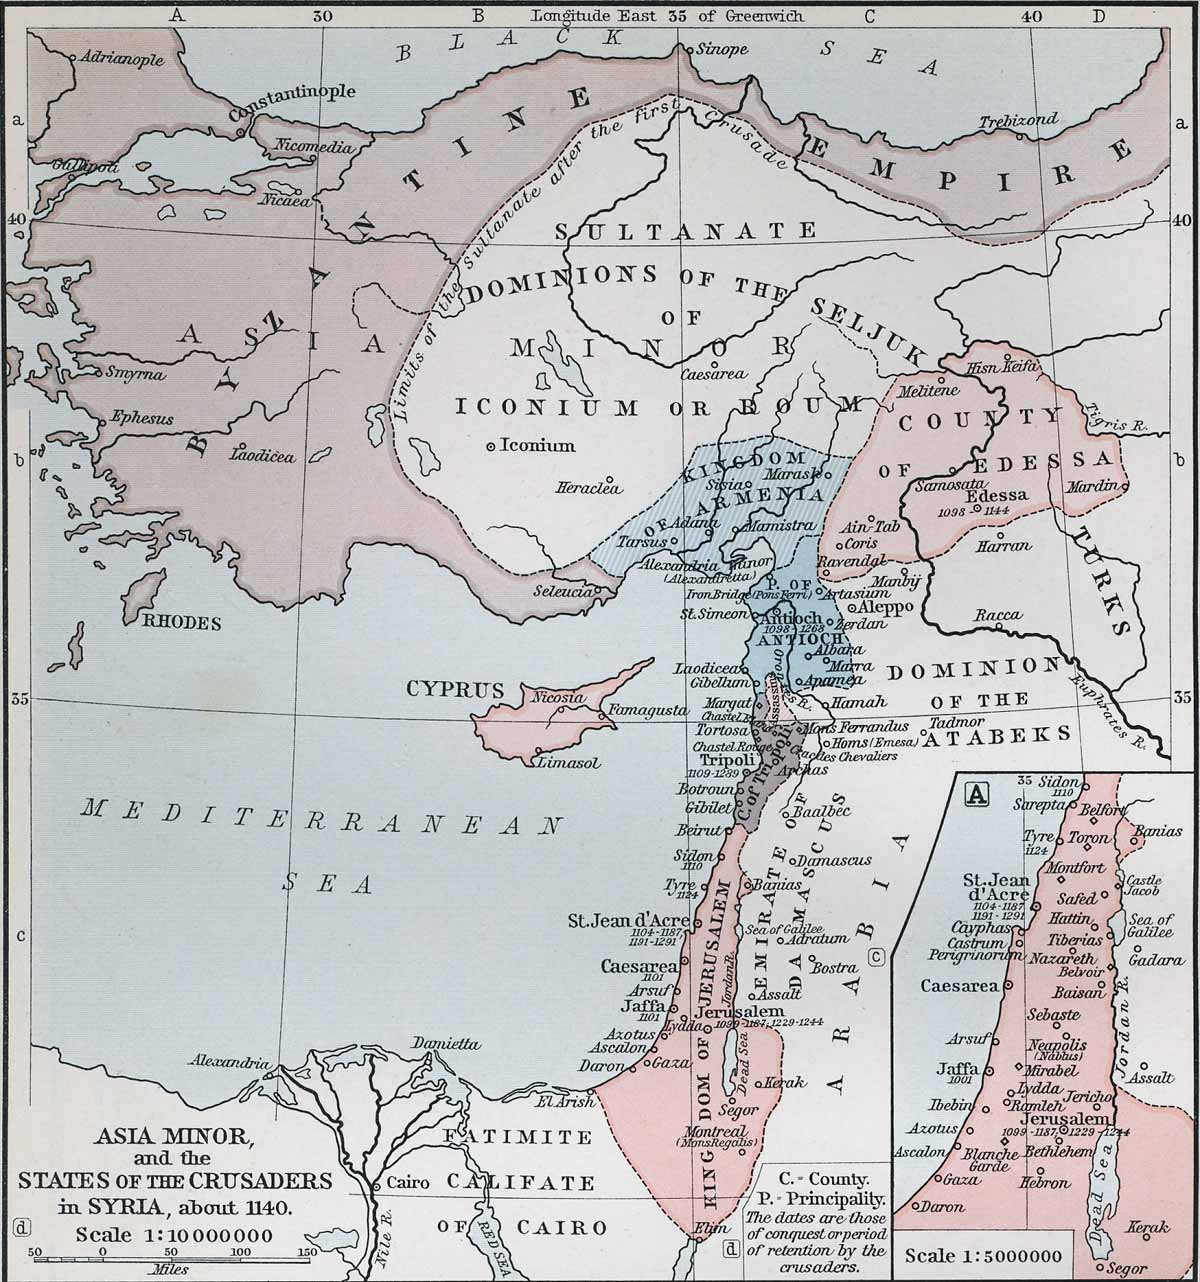 Asia Minor and the States of the Crusaders in Syria